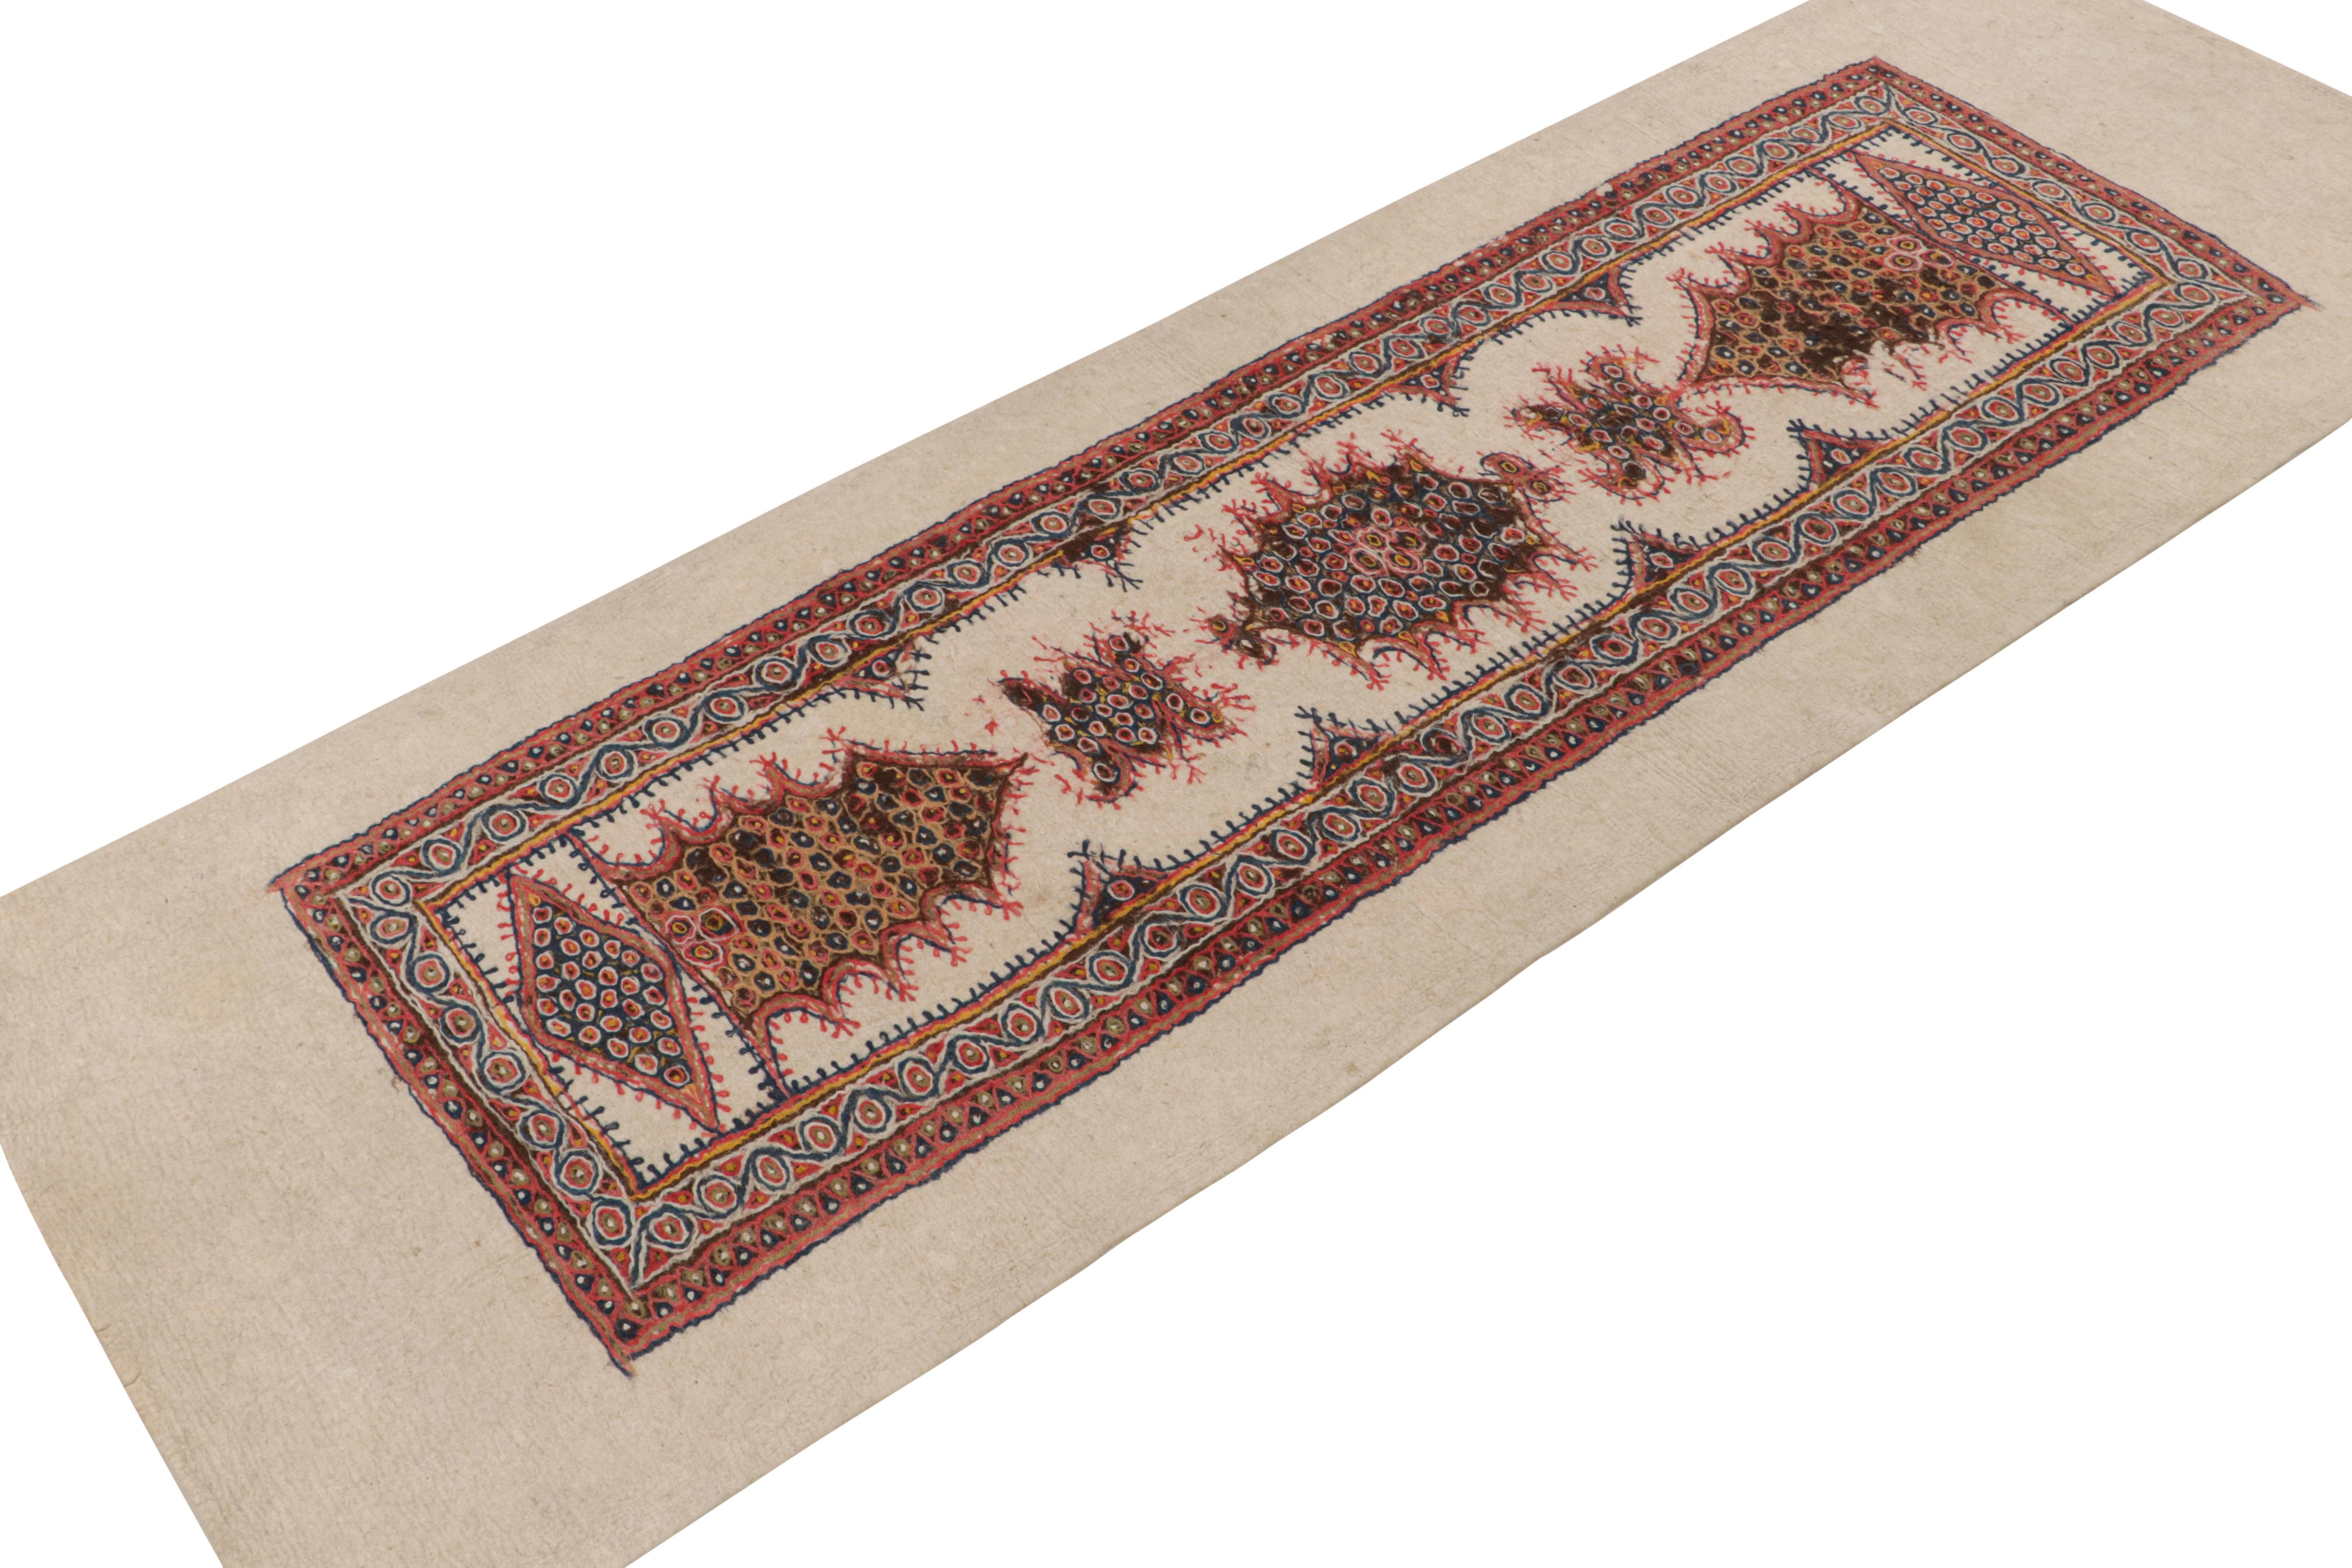 Hand-Knotted Vintage Felted Persian Kilim with Geometric Patterns on Beige, by Rug & Kilim For Sale